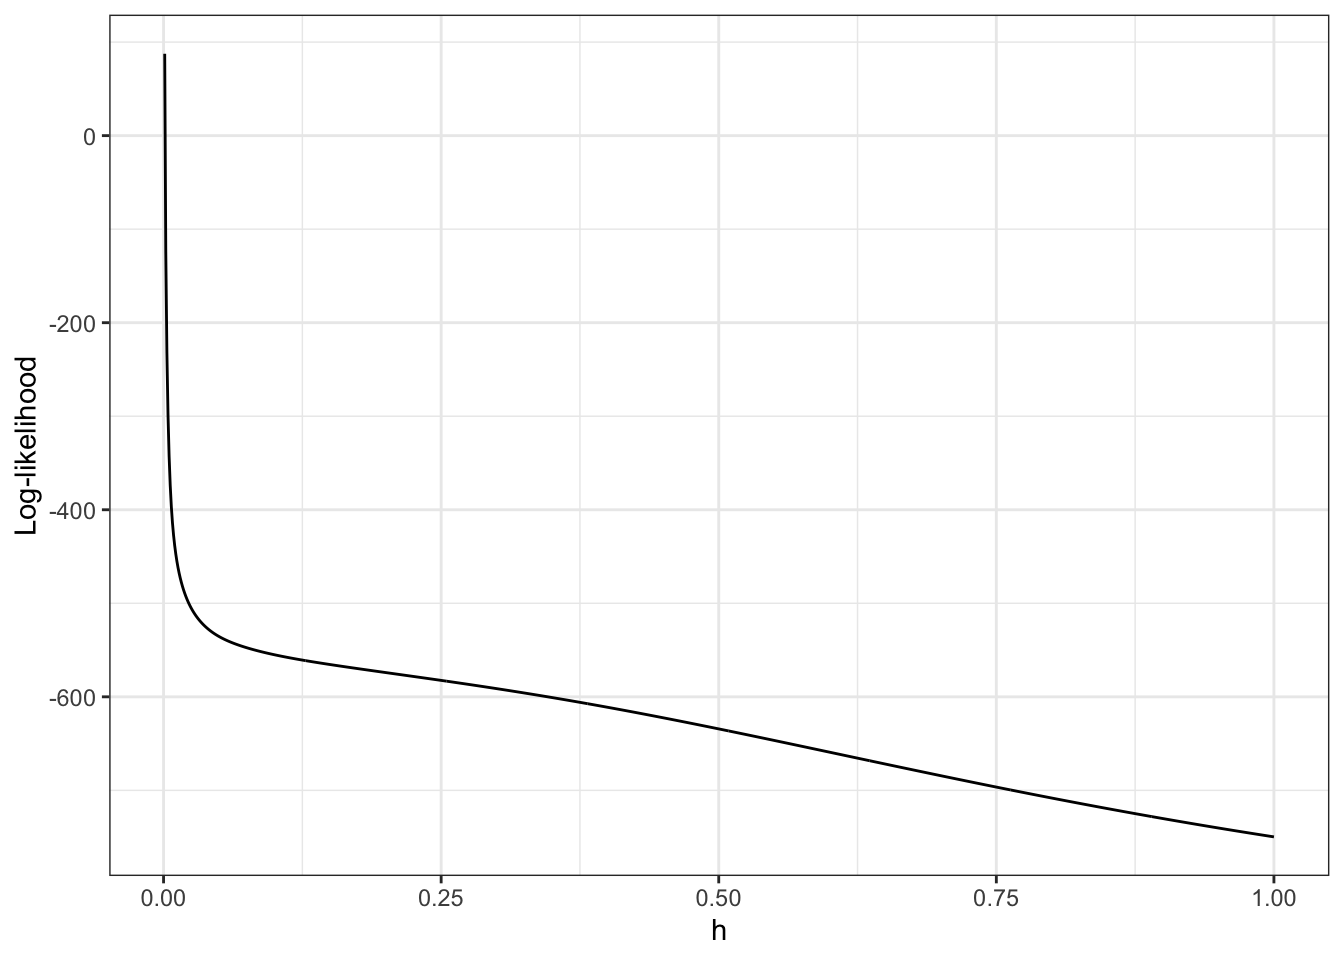 Log-likelihood, $\ell(\overline{f}_h)$, for the densities $\overline{f}_h$ as a function of $h$. Note the log-scale on the right.